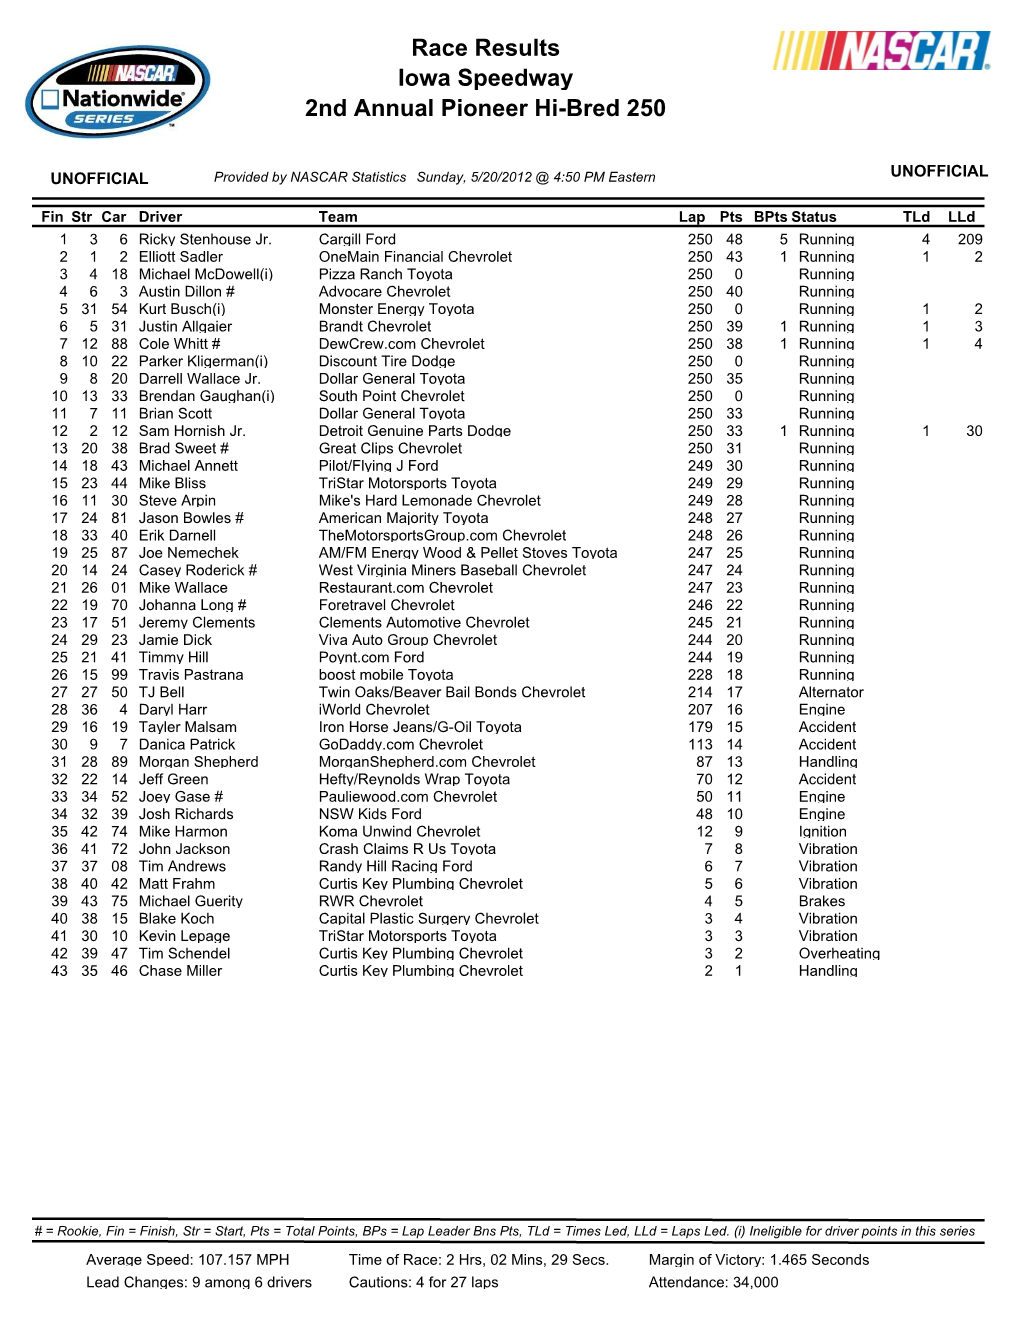 Iowa Speedway 2Nd Annual Pioneer Hi-Bred 250 Race Results